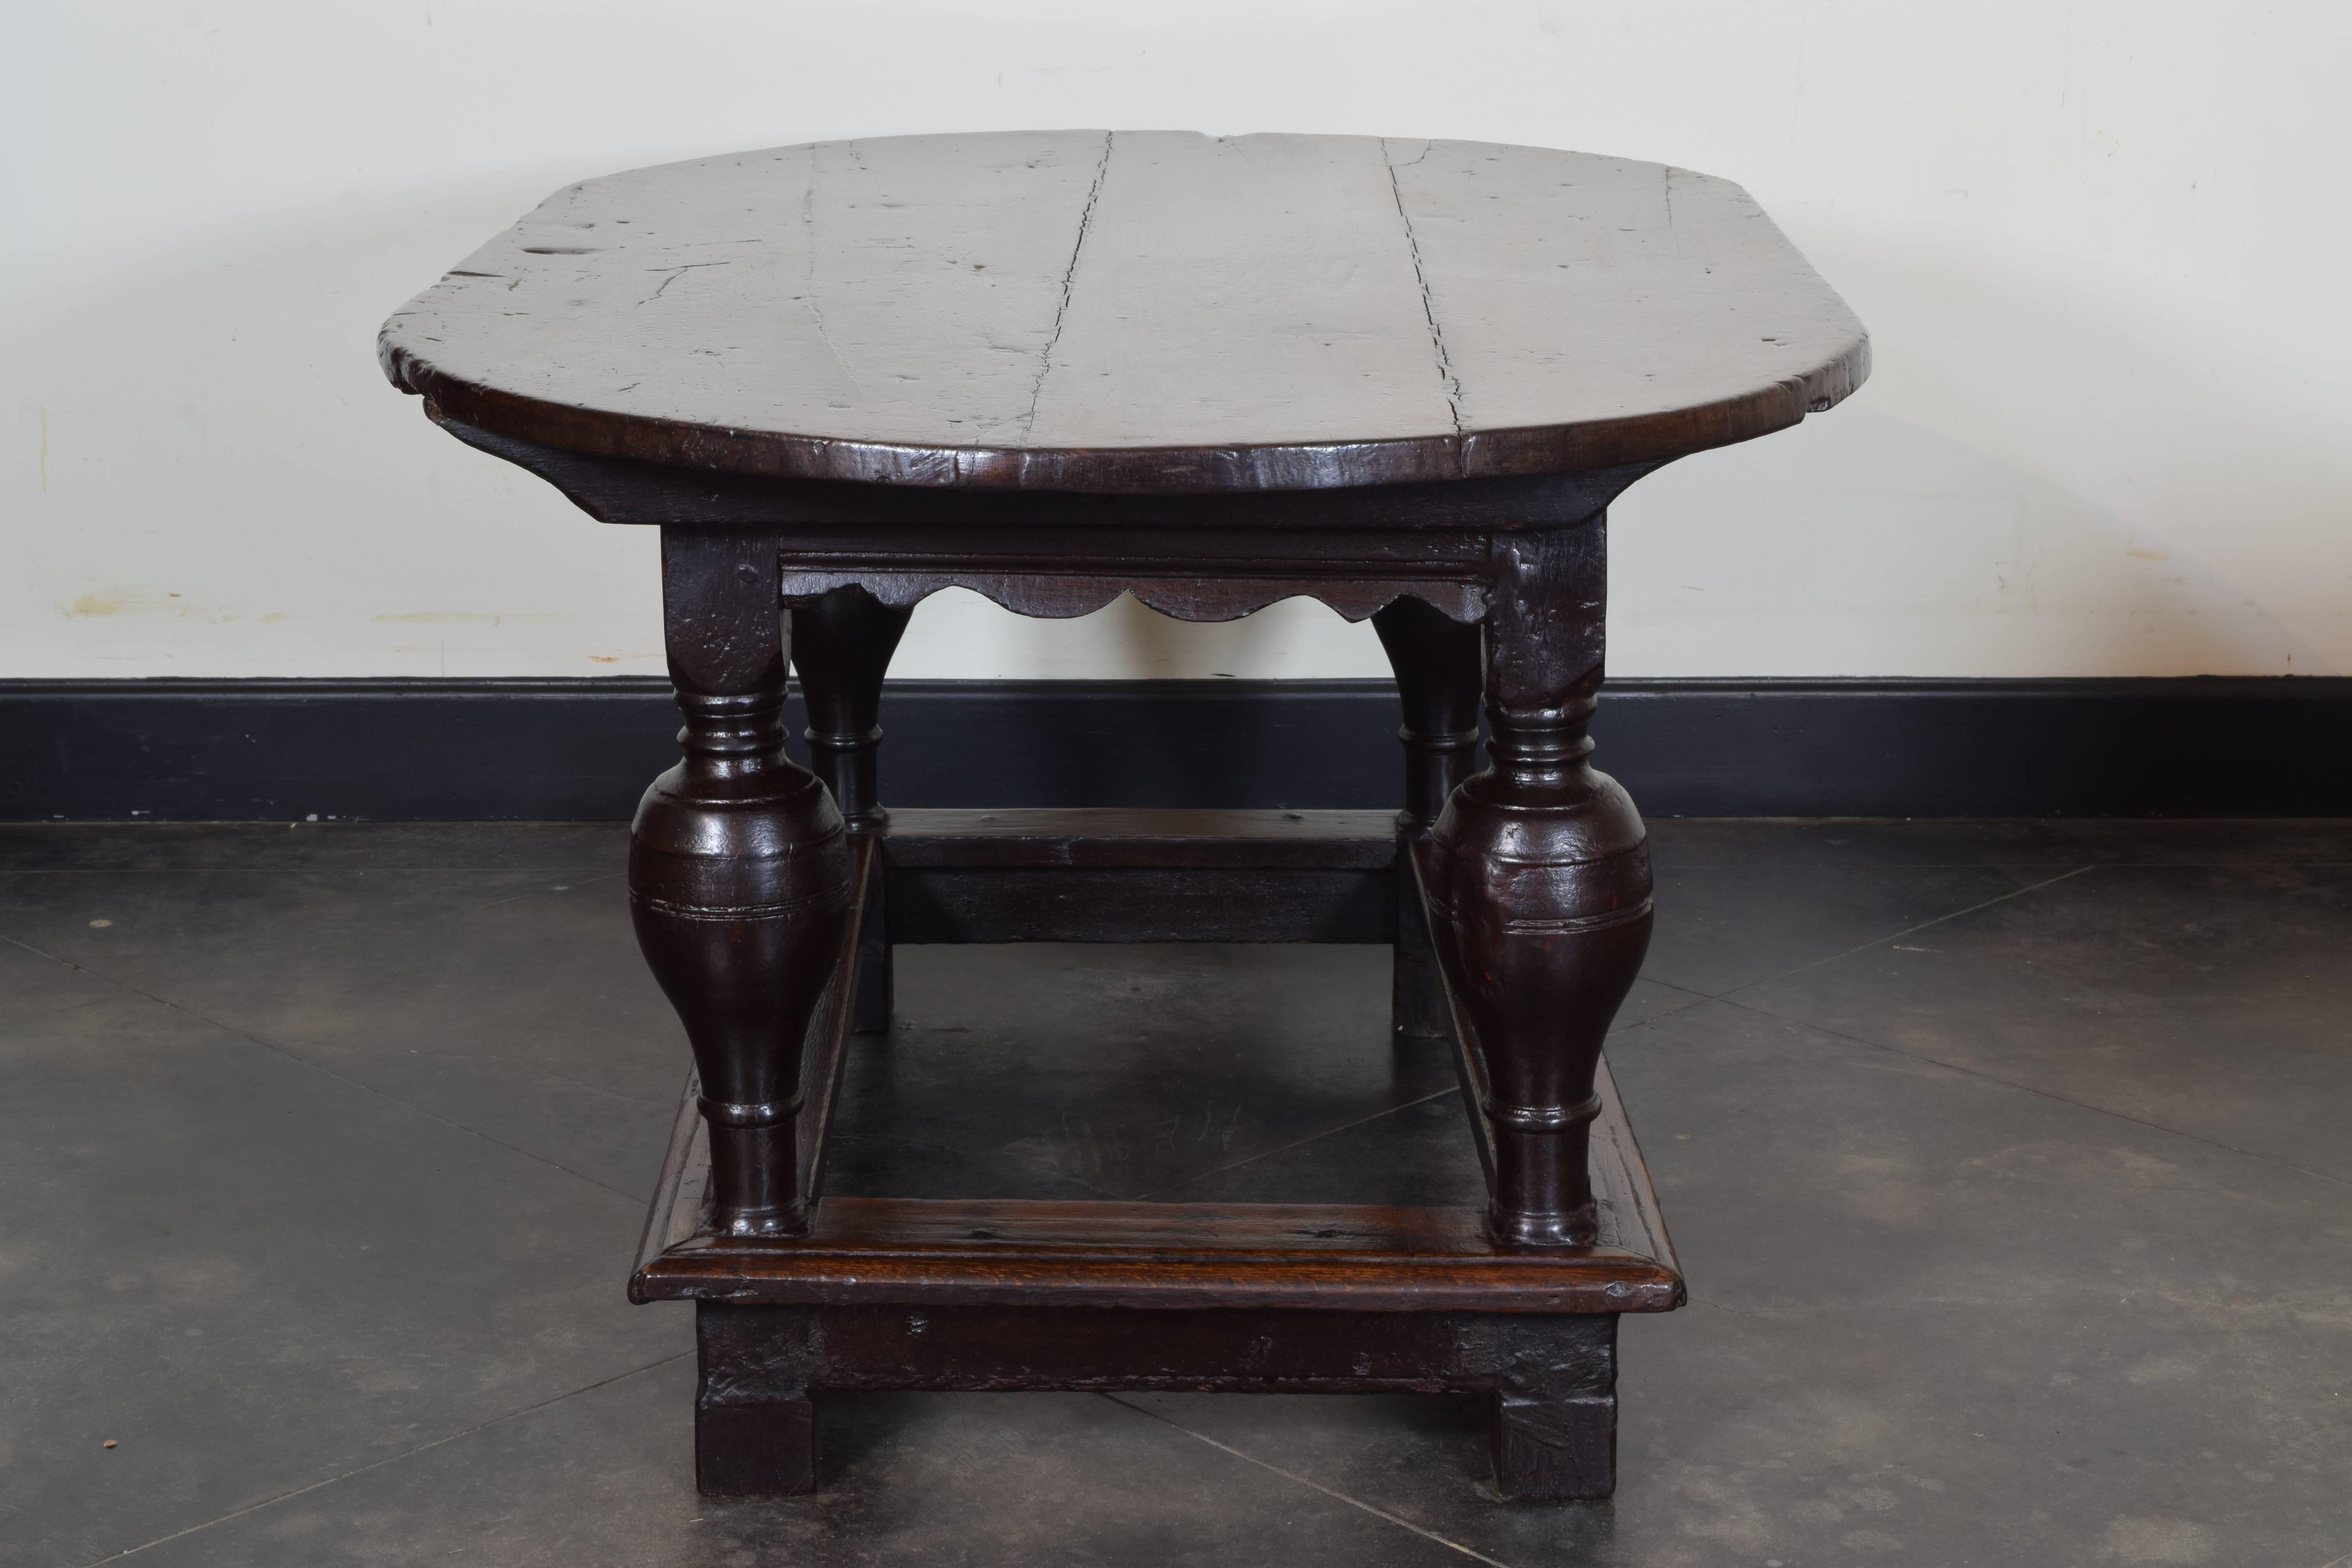 Baroque Flemish Carved Turned and Shaped Dark Oak Oval Table, Early 17th Century